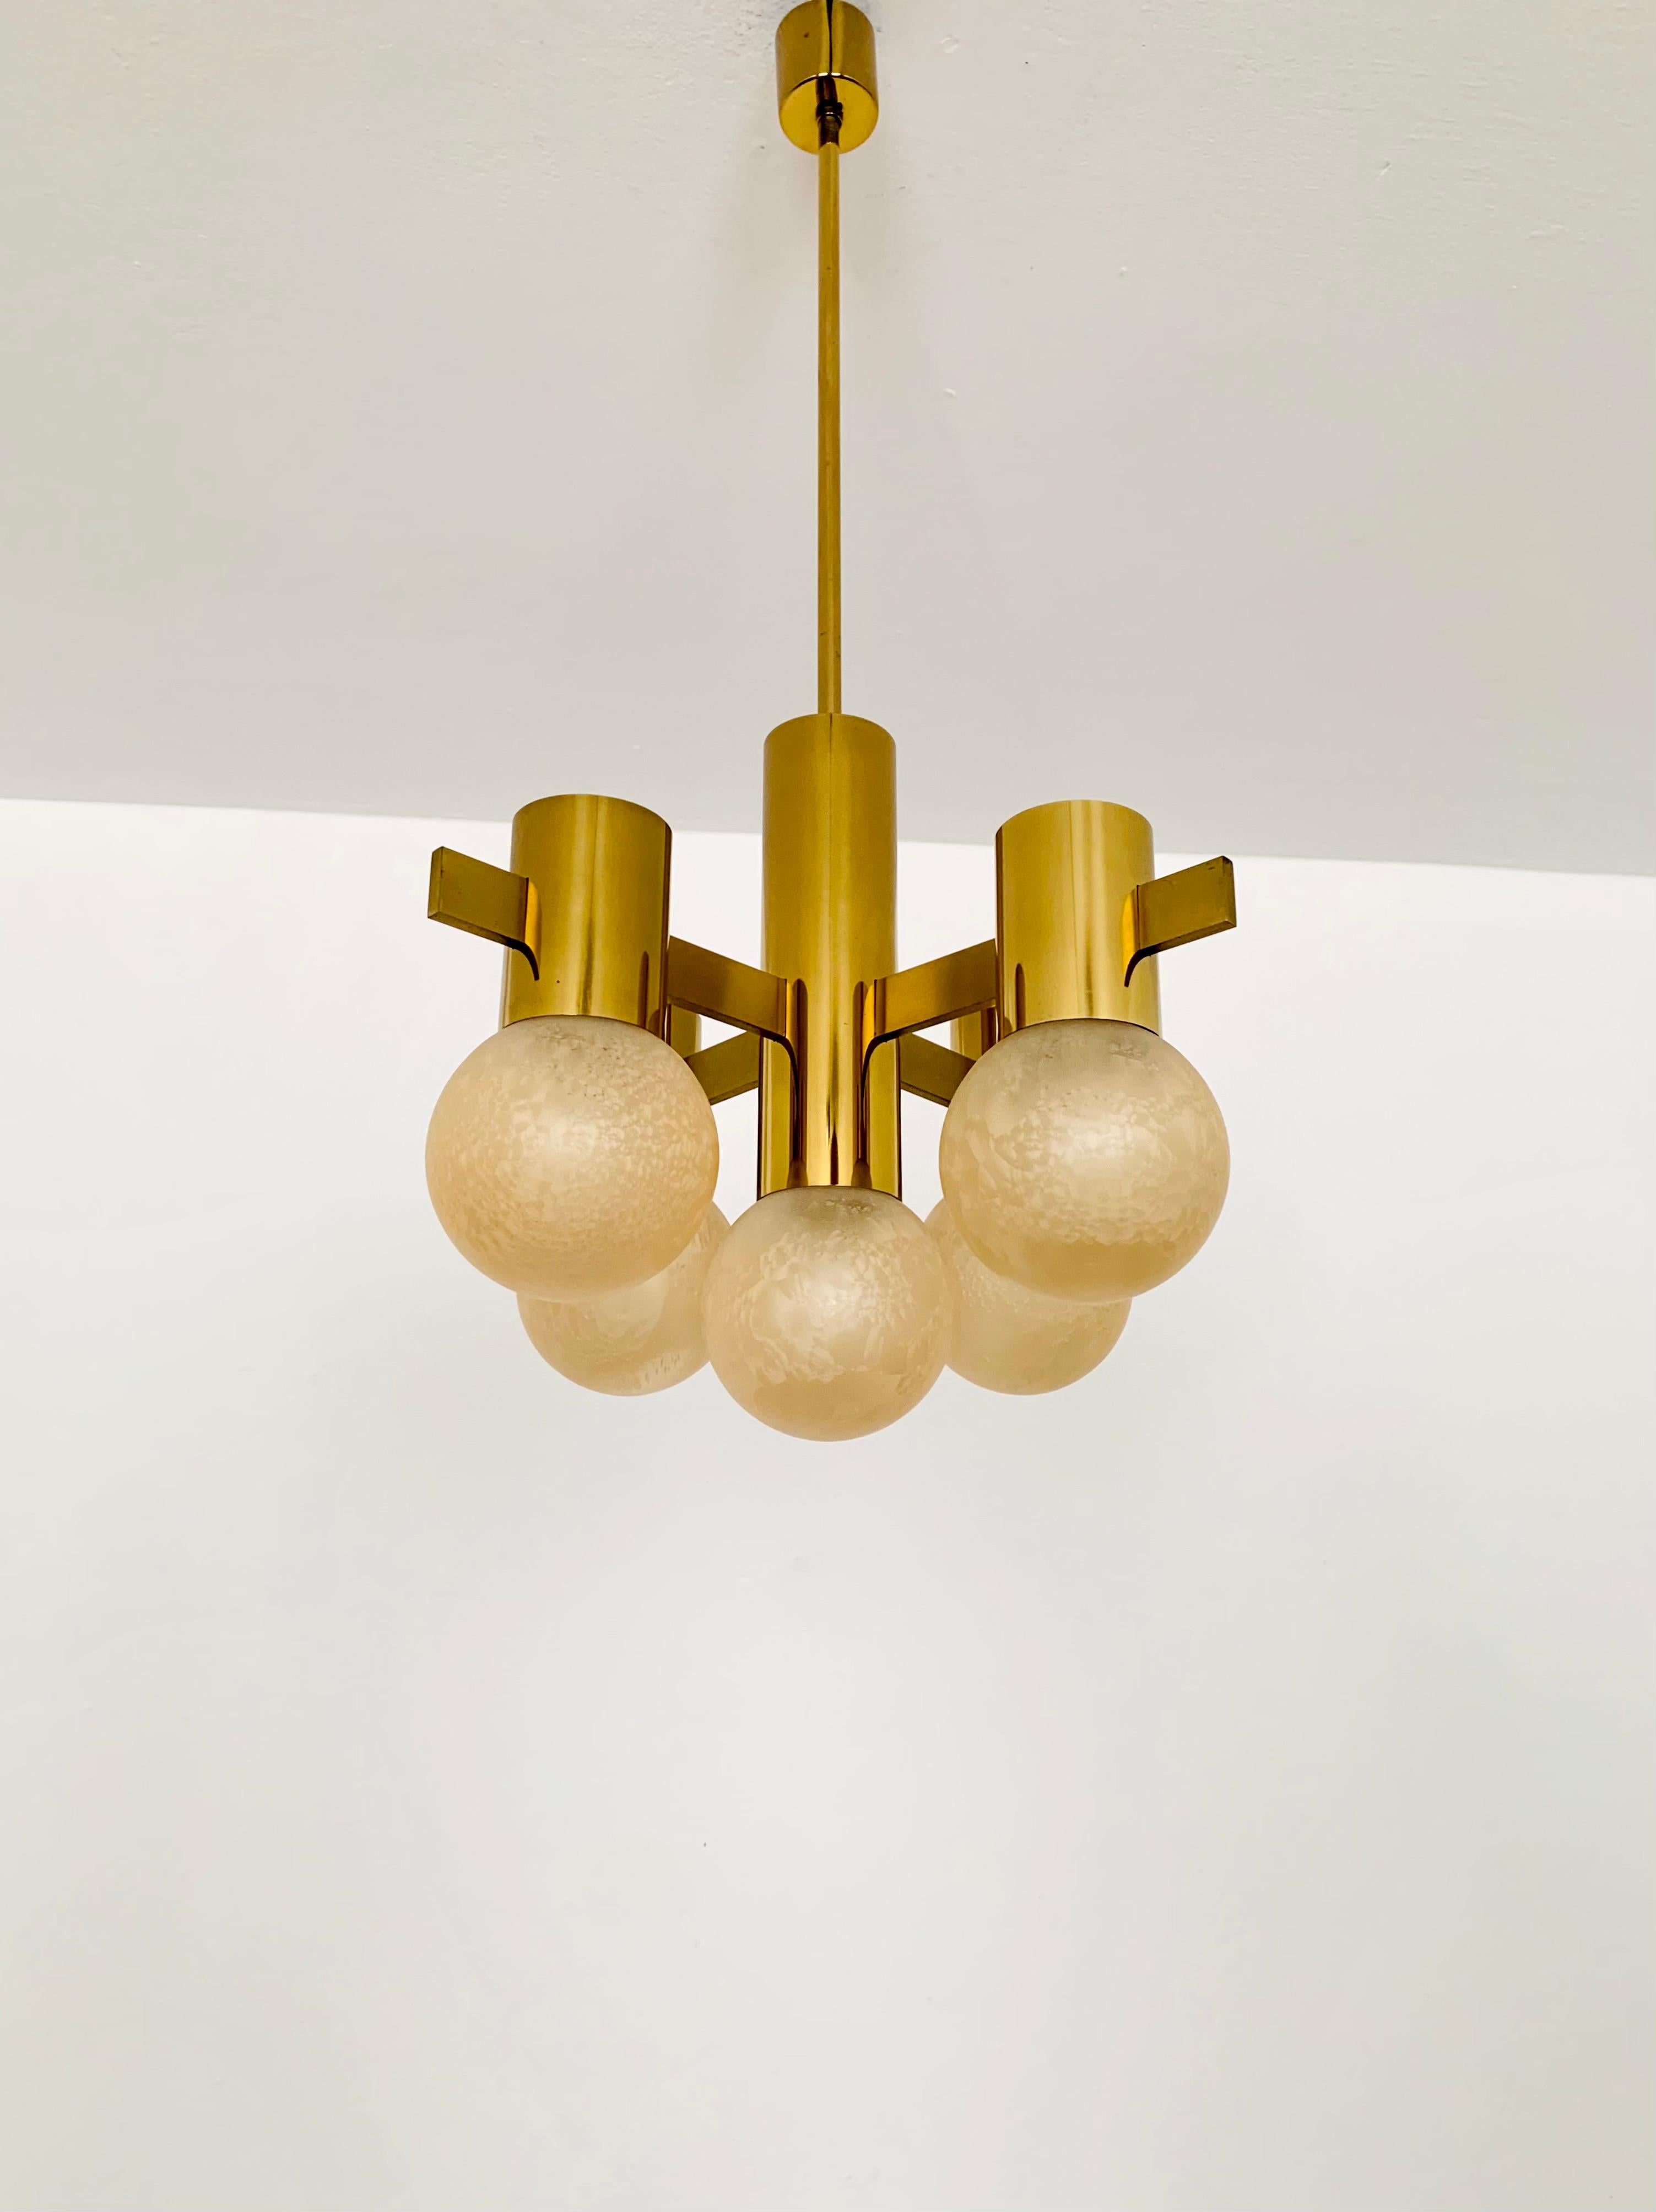 Wonderful and rare Sputnik chandelier from the 1960s.
The structured lampshades spread a sparkling light.
The lamp has a very high quality finish.
Very contemporary design with a fantastic look.

Condition:

Very good vintage condition with slight